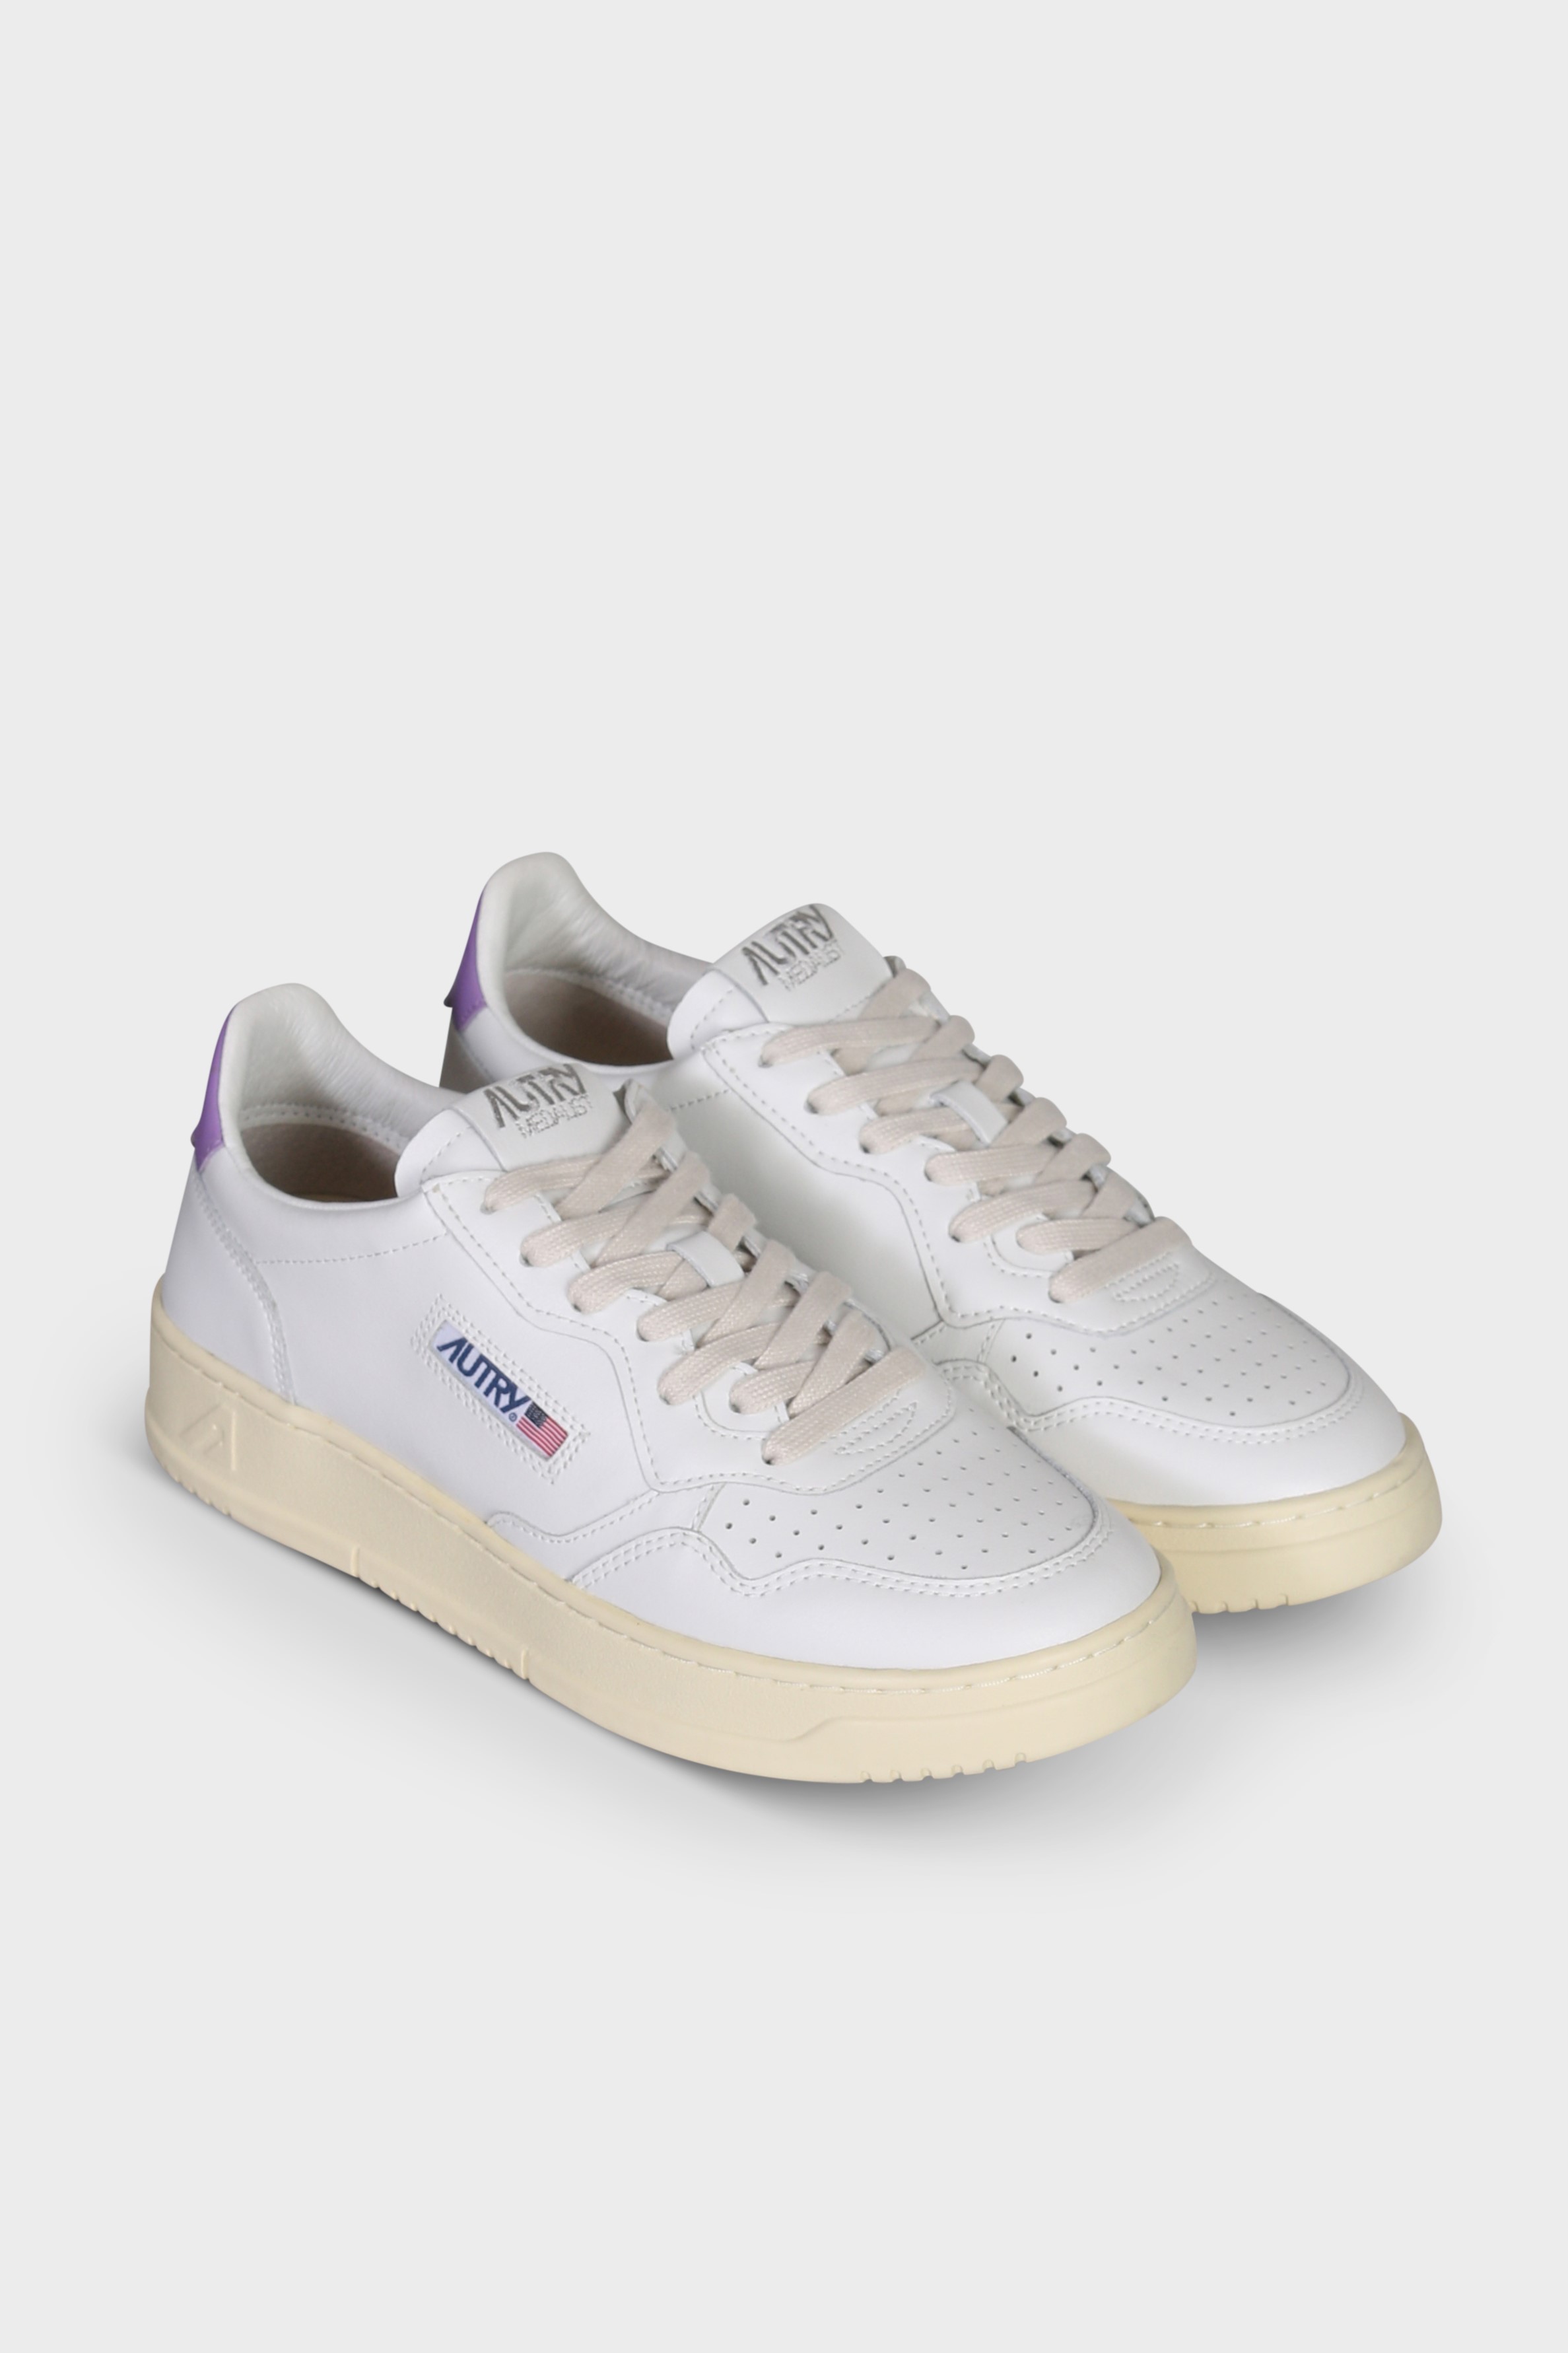 AUTRY ACTION SHOES Medalist Low Sneaker in White/Lavender 35